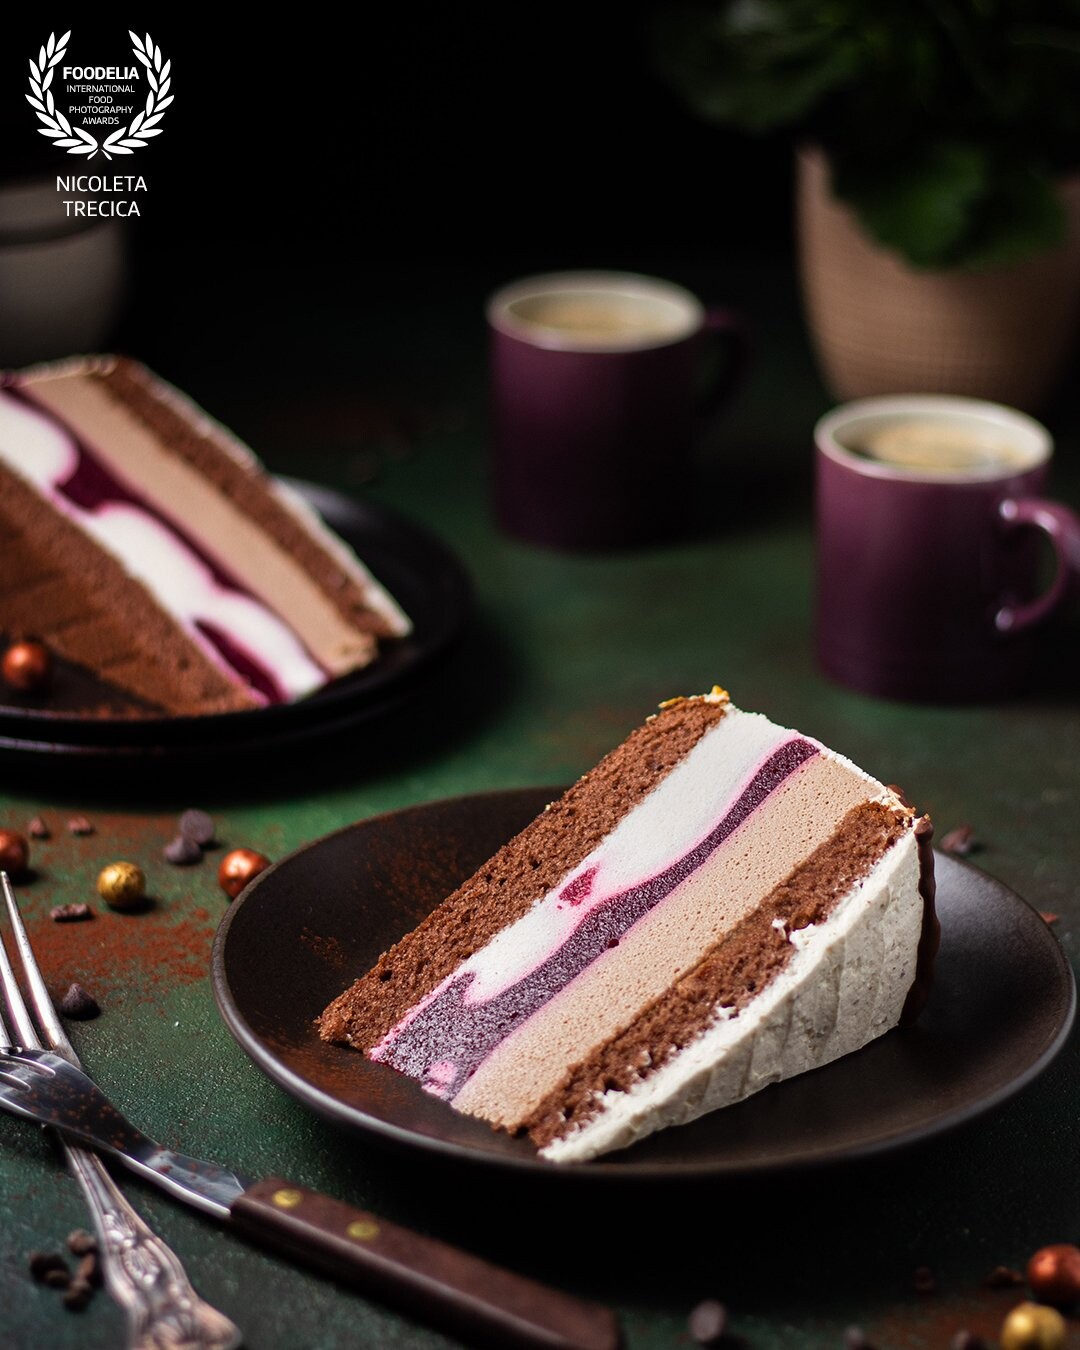 Beautiful slices of mouse cake, my leftovers from a anniversary. I chose to have a photo in a dark mood with colourful layers, recreating a coffee and cake time moment.